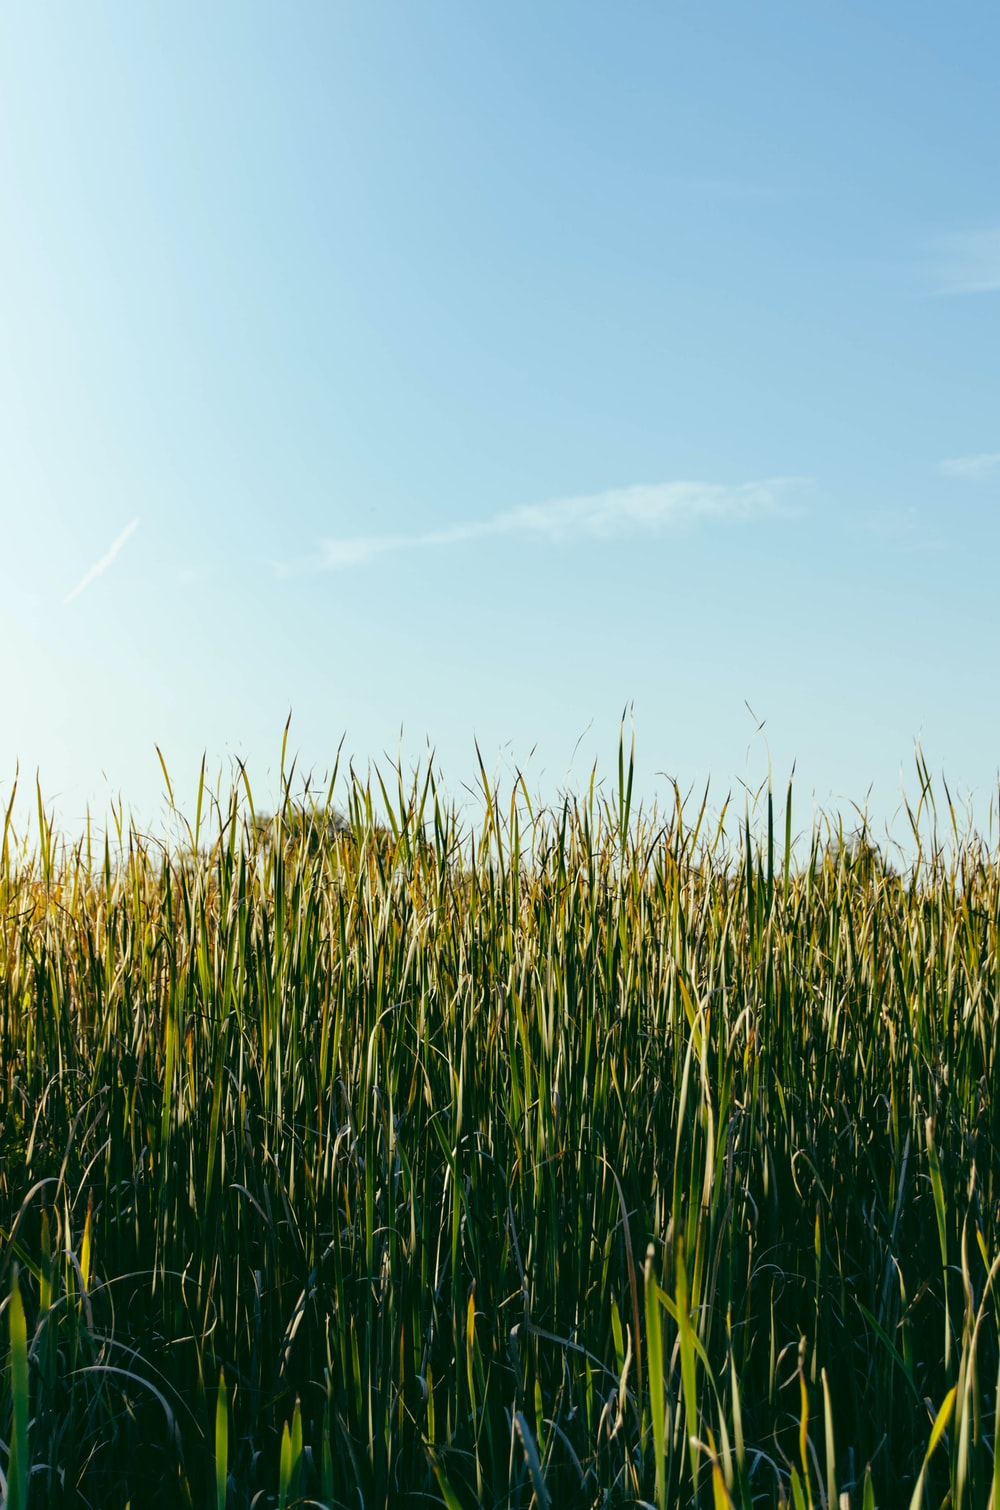 Tall Grass Picture. Download Free Image